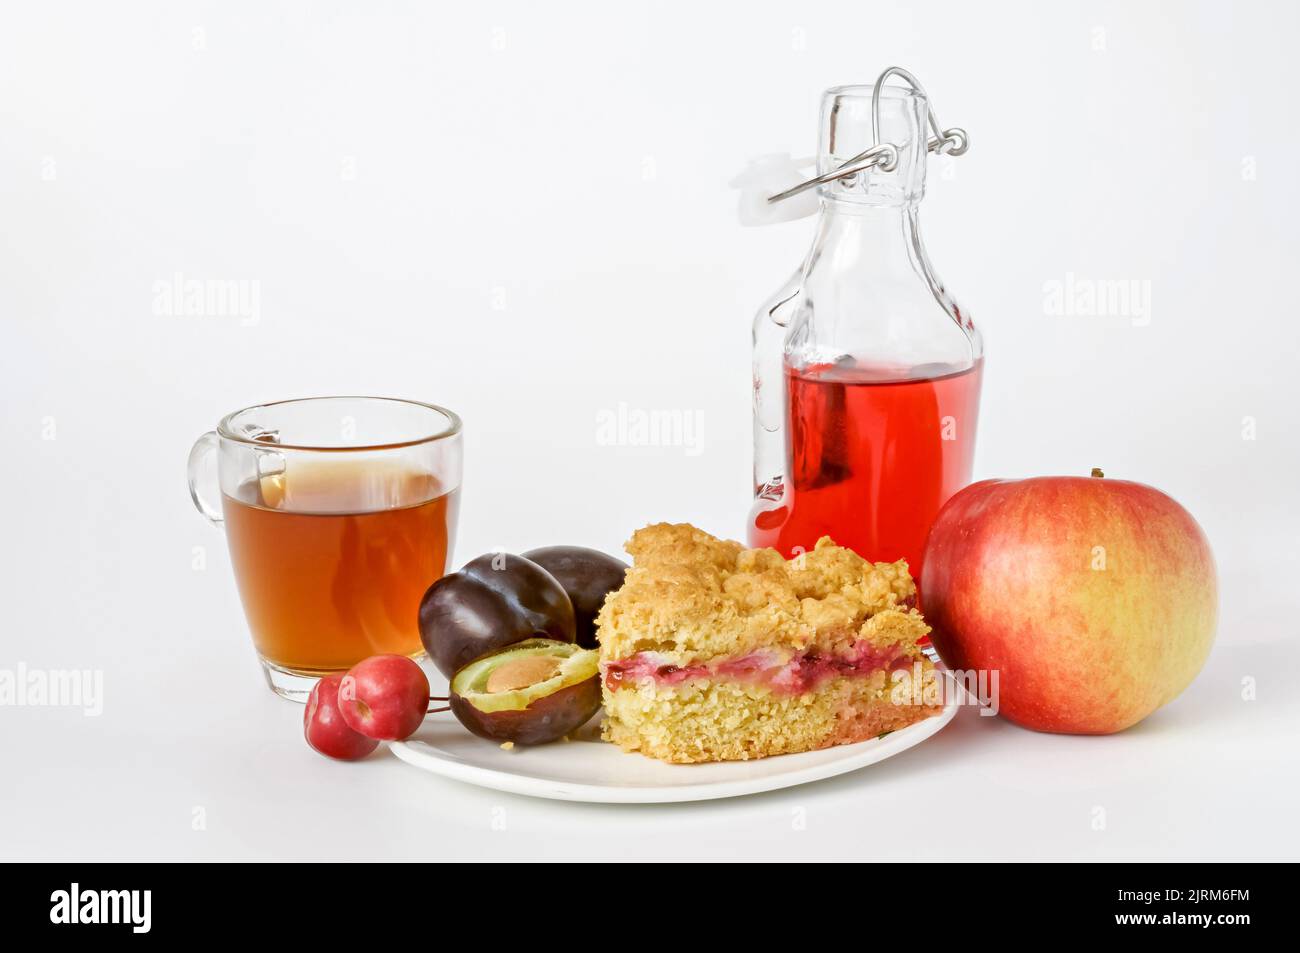 plum cake, fruit juice in a glass and in a bottle, plums and apple on a white background Stock Photo